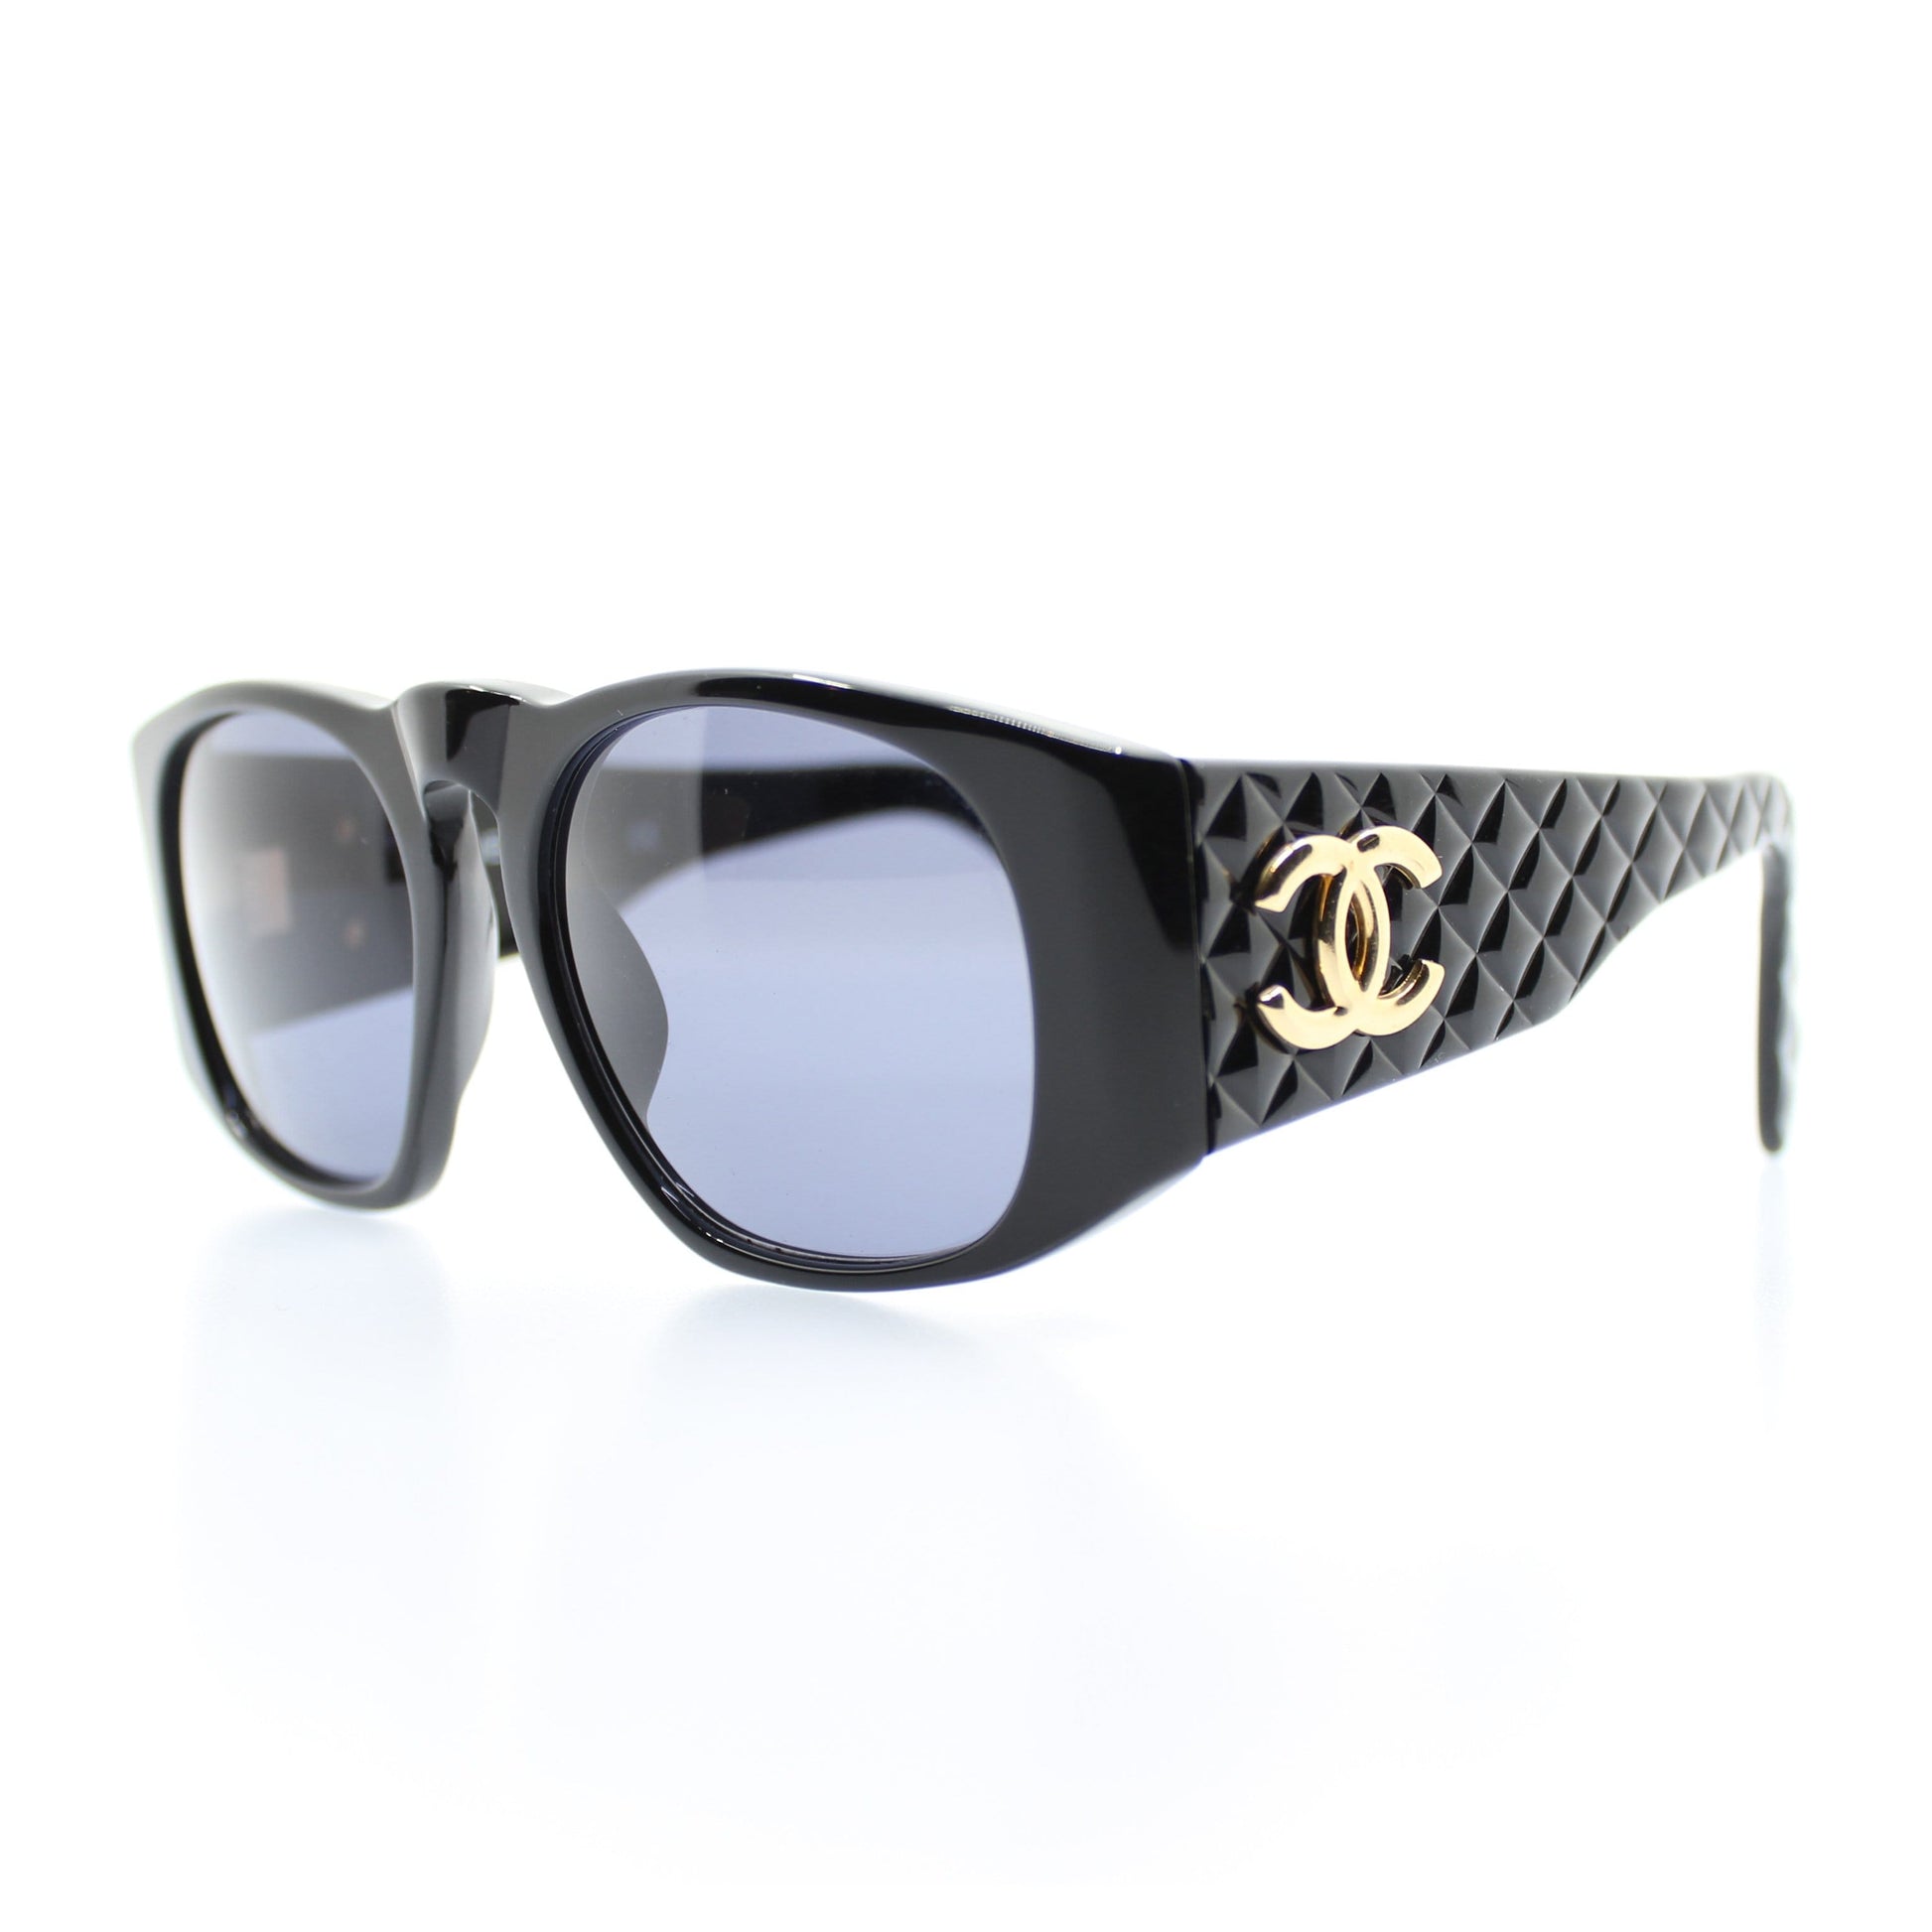 9) Pre-Owned authentic CHANEL black classic sunglasses with blue lenses